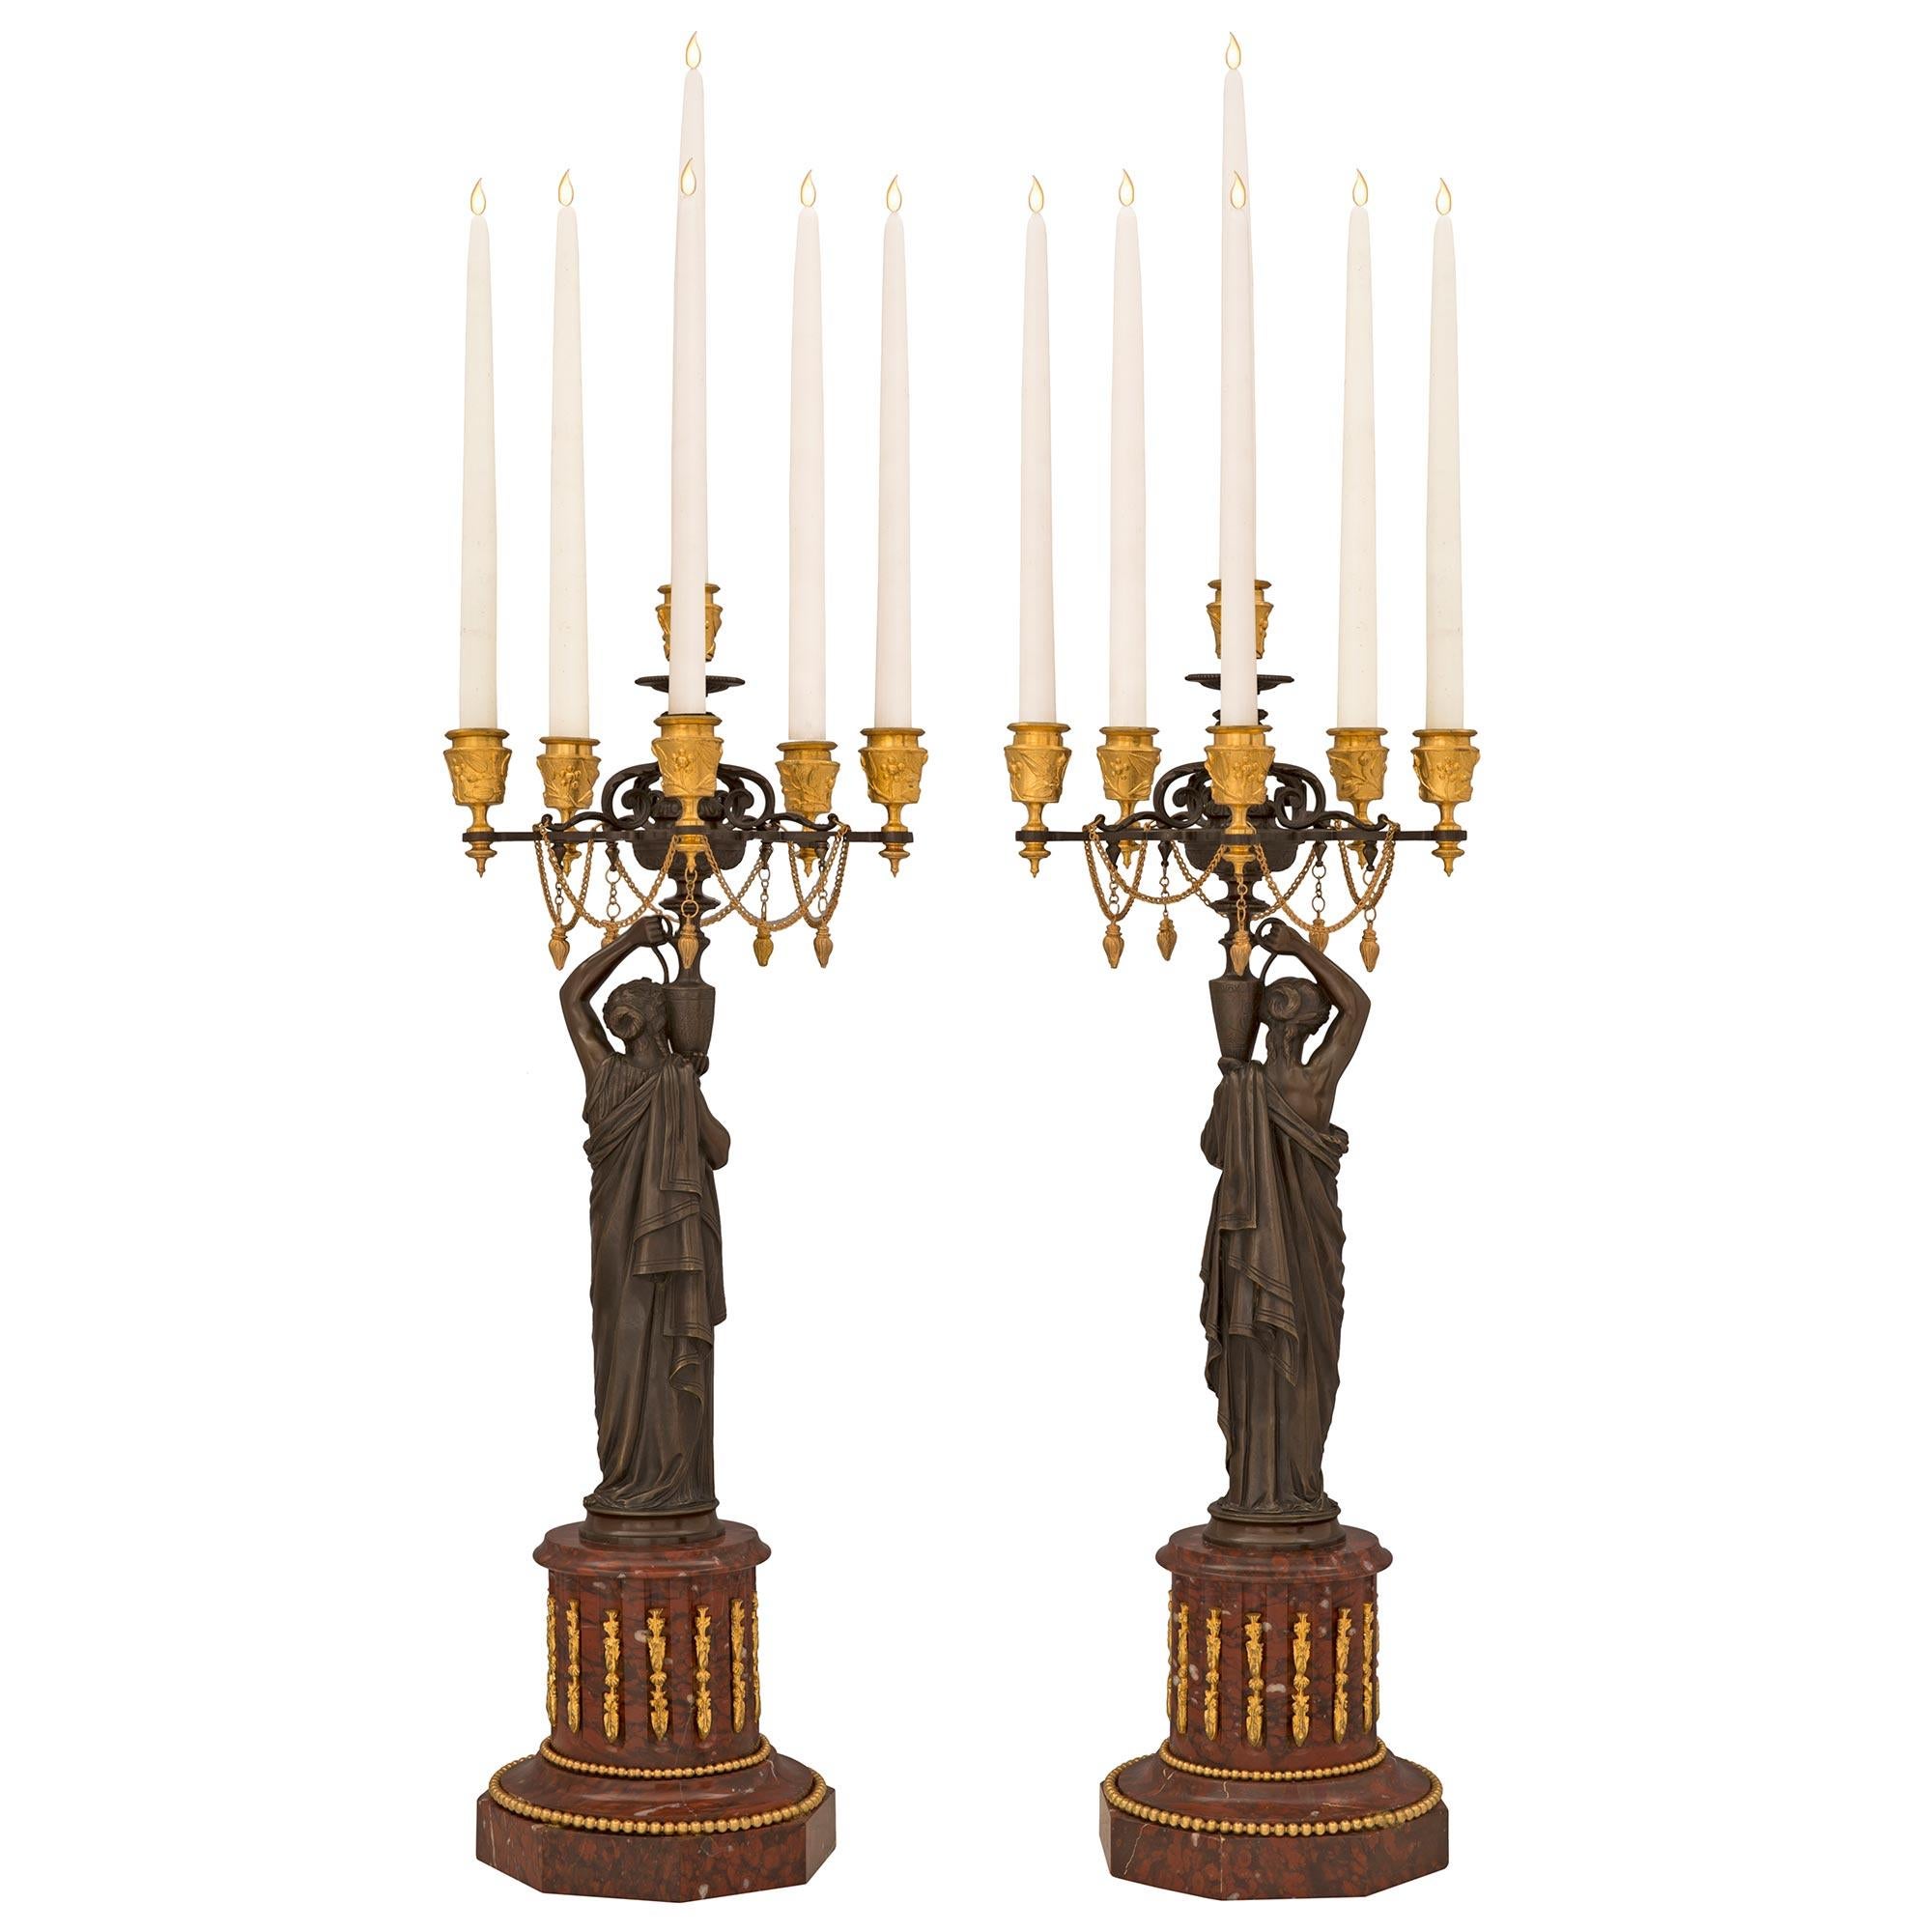 A striking and high quality true pair of French 19th century Louis XVI st. patinated bronze, ormolu, and Rouge Griotte marble candelabras, attributed to H. Ferrat. Each six arm candelabra is raised by an octagonal Rouge Griotte marble base with a